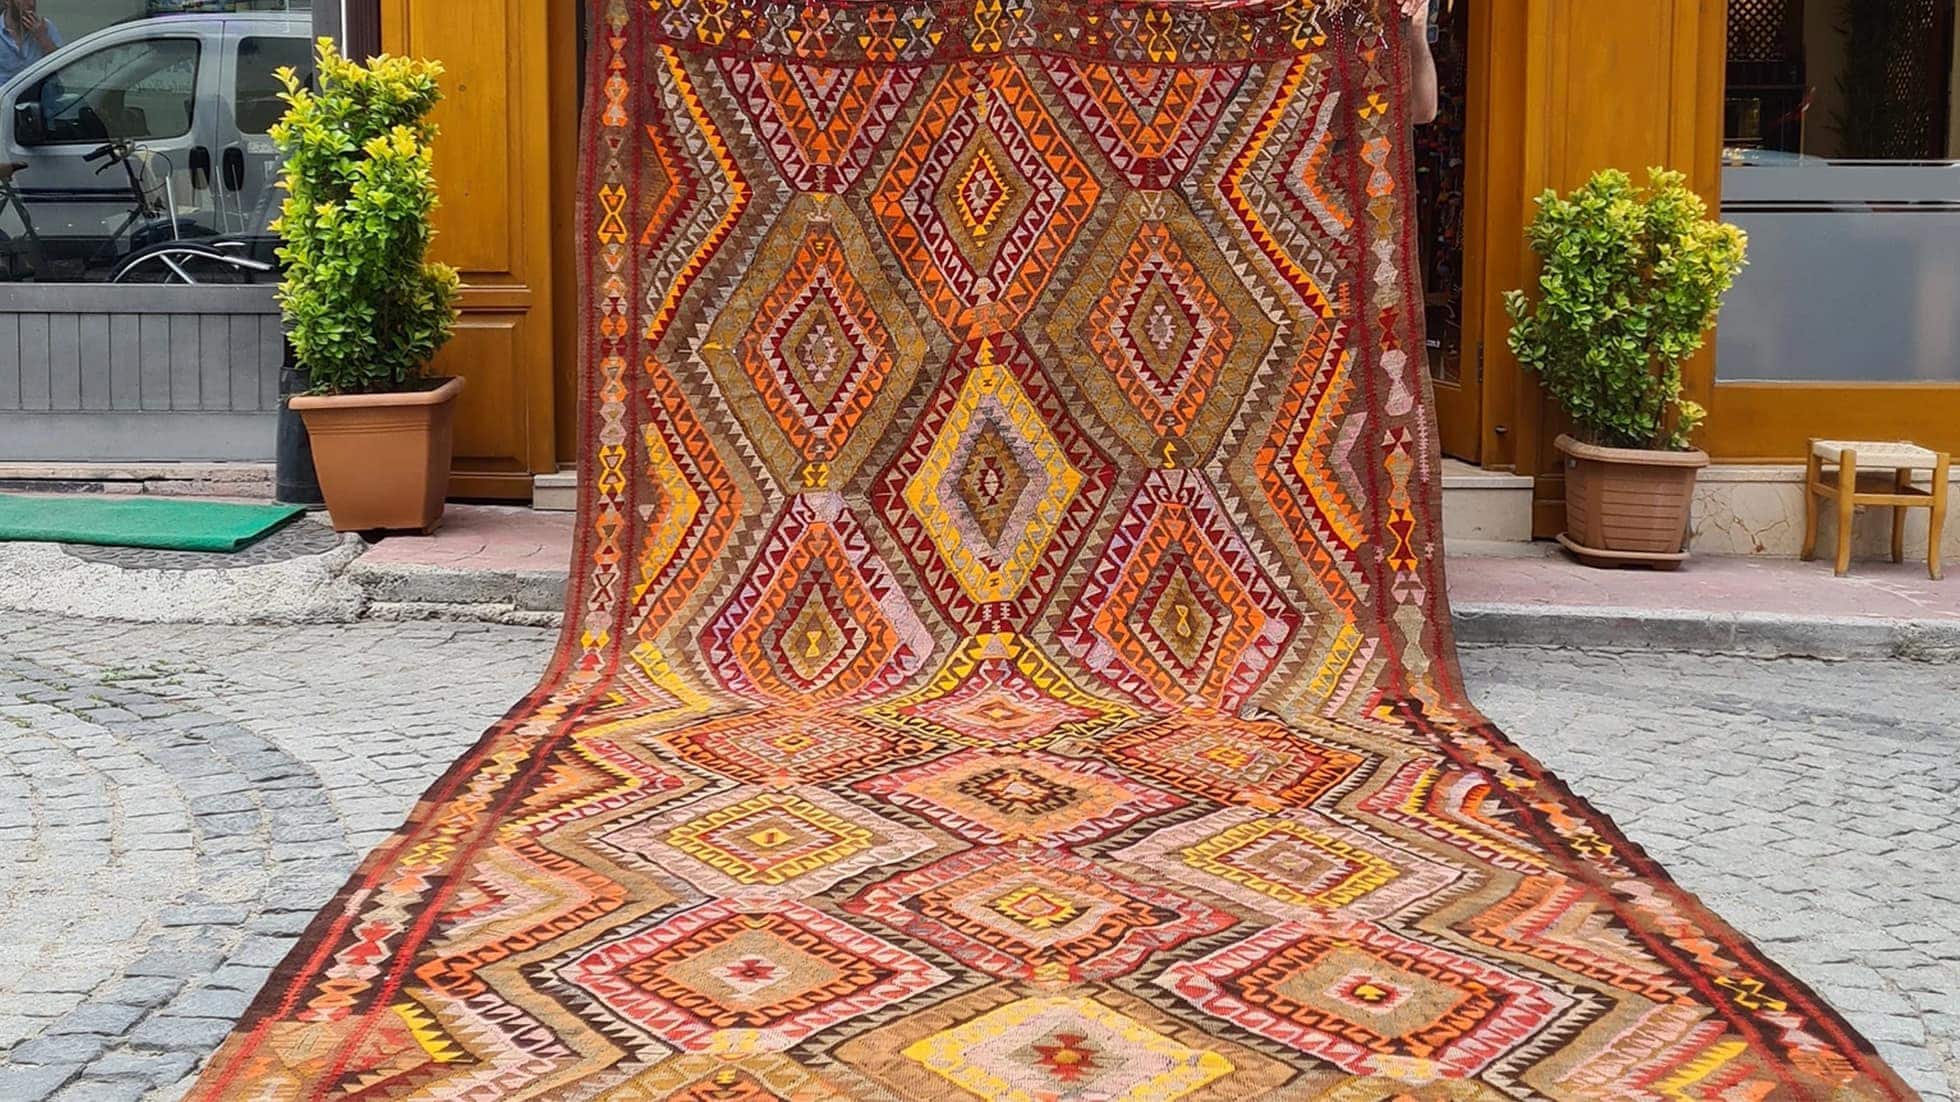 vintage handcrafted turkish tribal rug in yoruk style in saffron yellow and bronze orange from mid-century